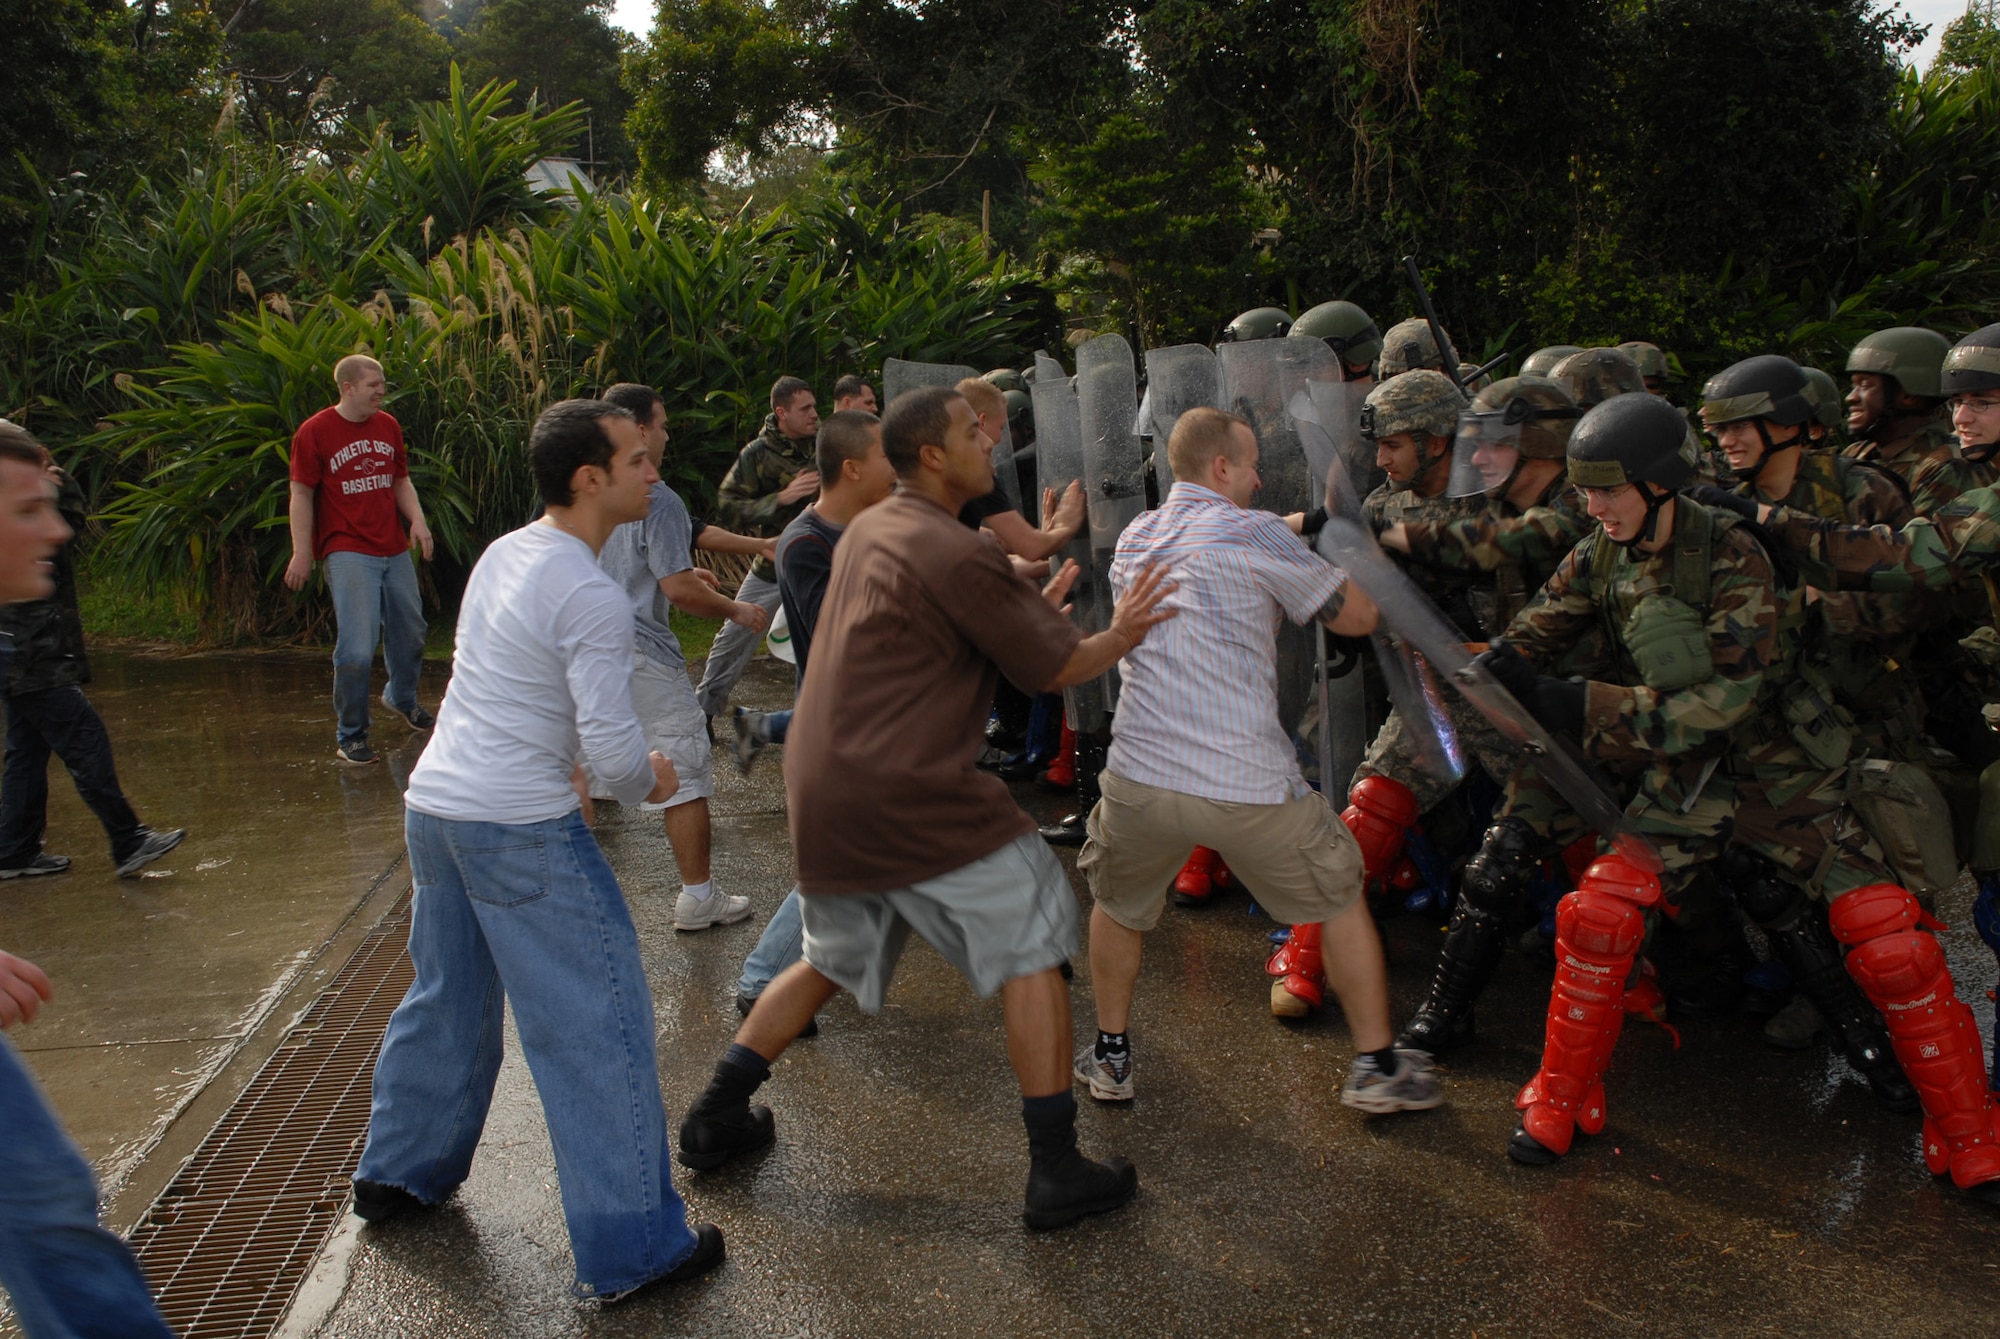 Protesters attempt break the line at a simulated protest during local operational readiness exercise Beverly High 08-4 at Kadena Air Base, Feb. 11, 2008. The 18th Wing conducted the exercise from Feb. 10 to 15 to test Airmen's ability to respond in contingency situations. (U.S. Air Force photo/Tech. Sgt. Jason Edwards) 